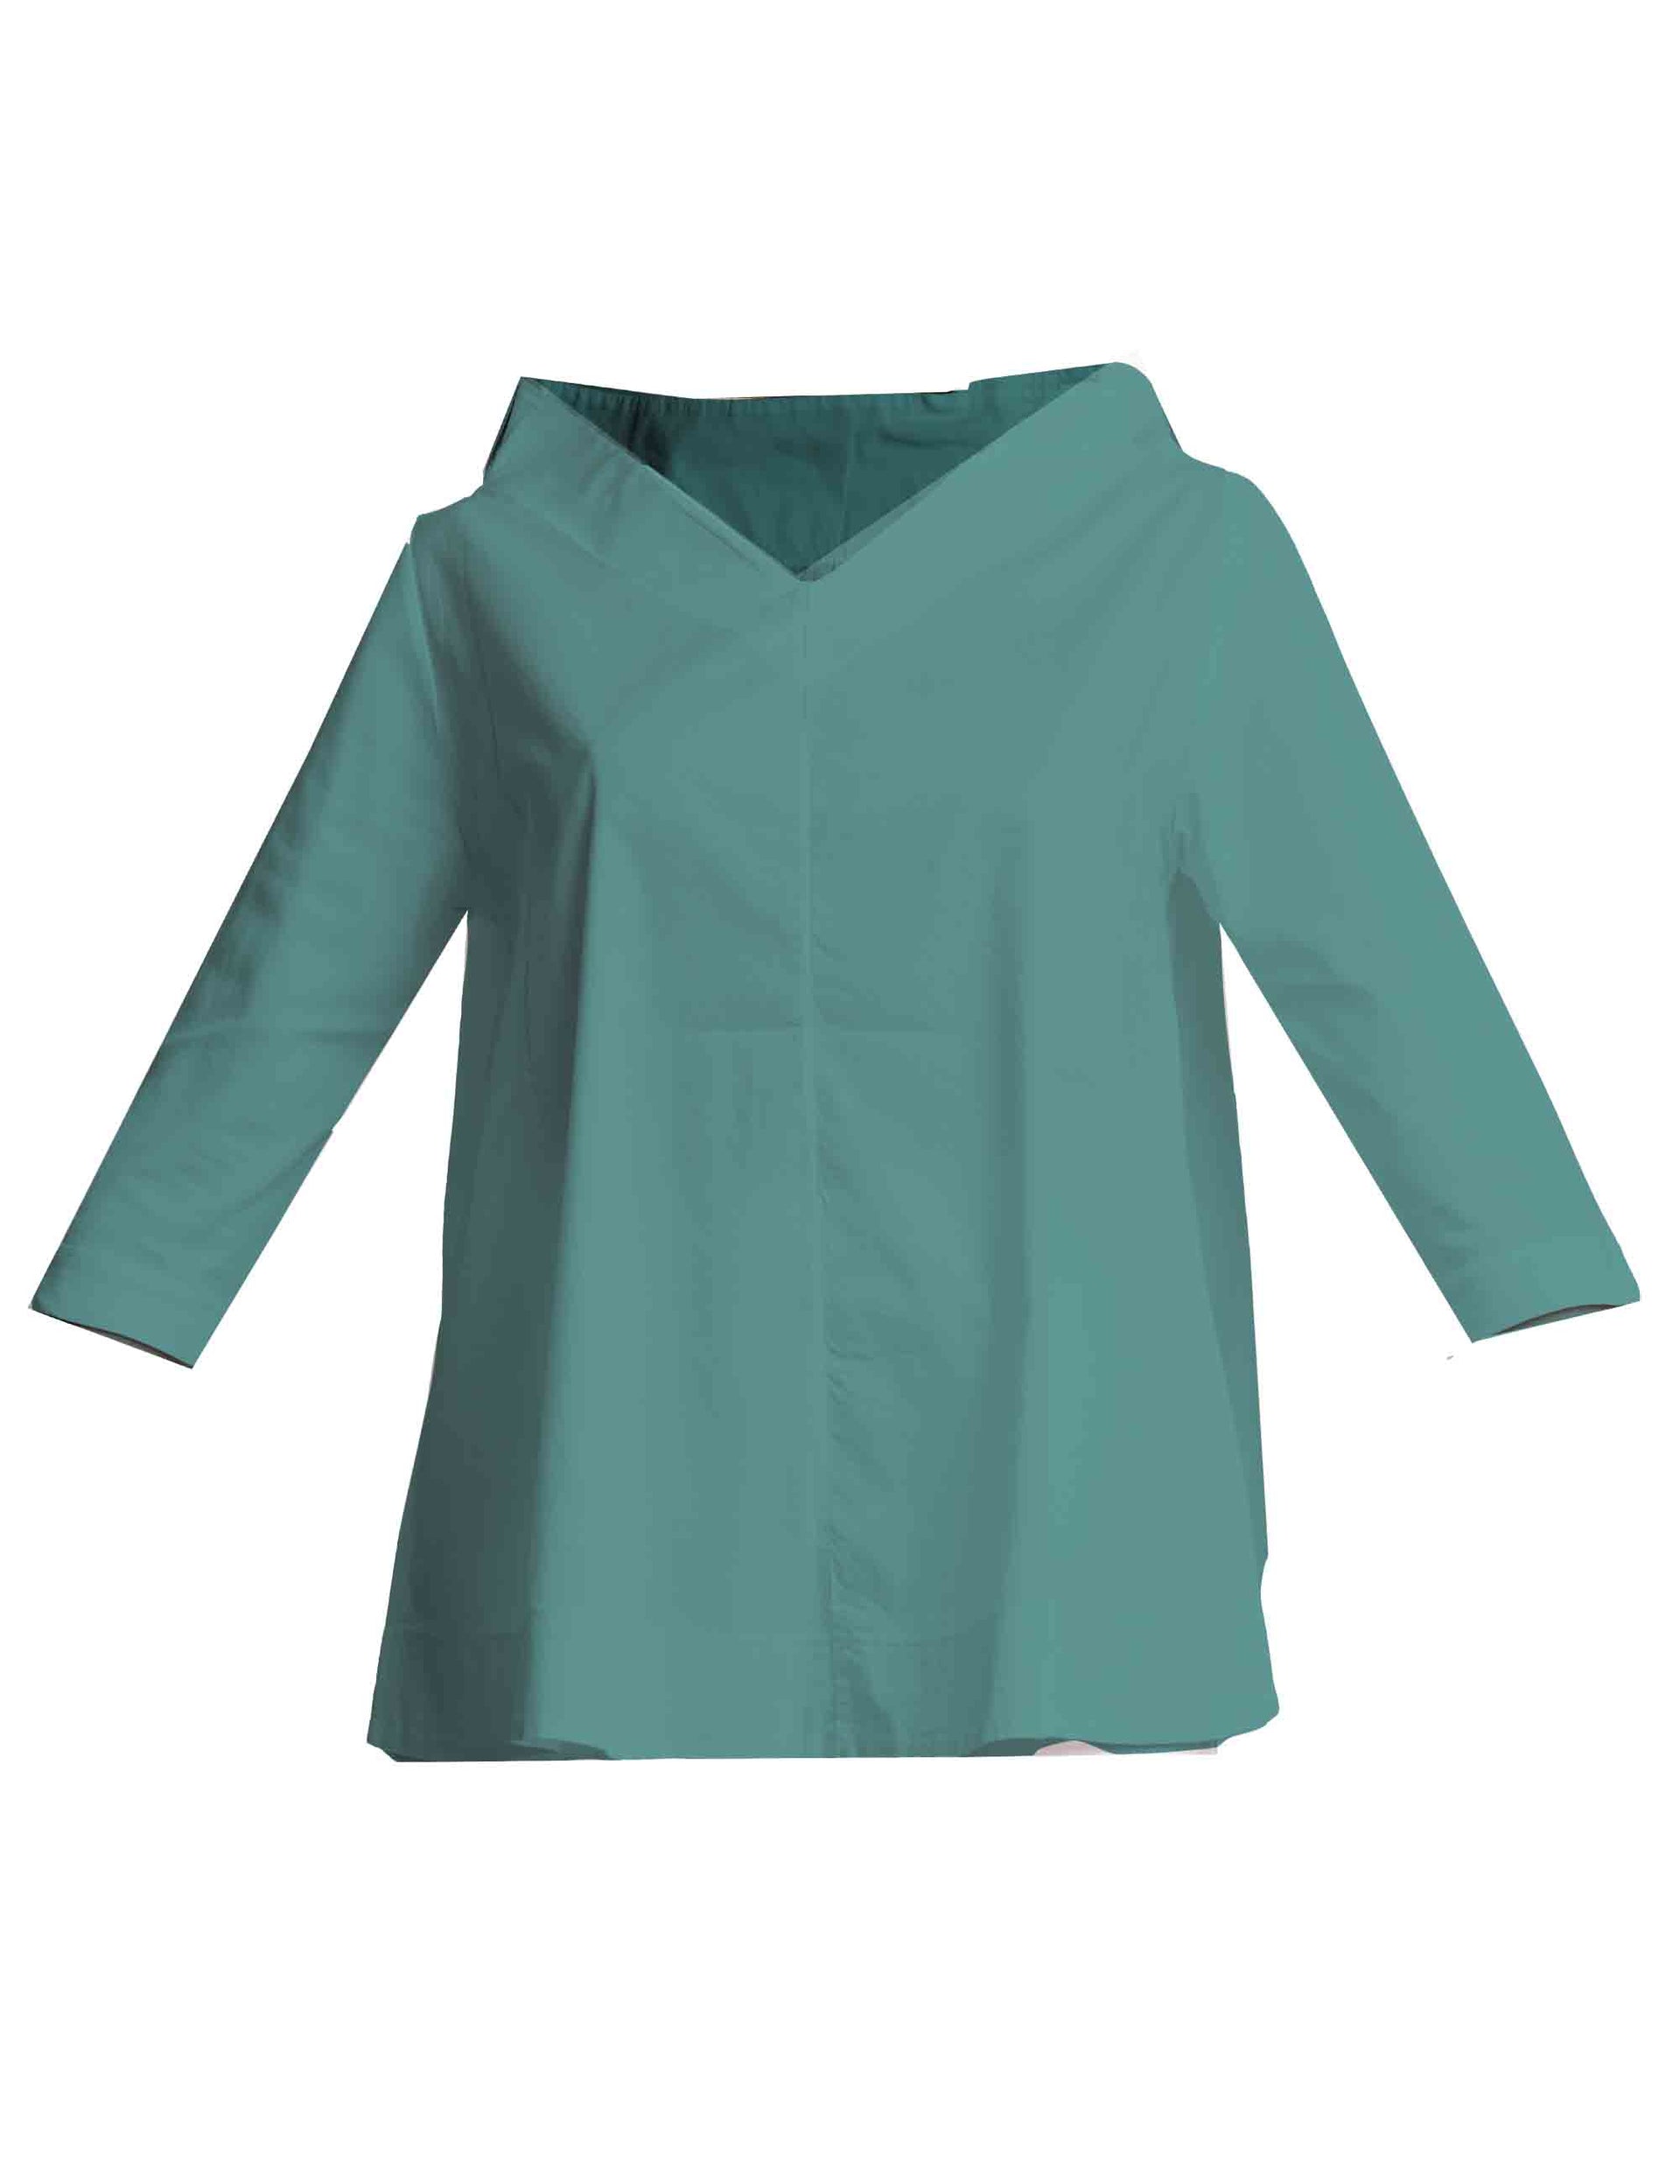 Women's green cotton T-shirt with V-neck and 3/4 sleeves